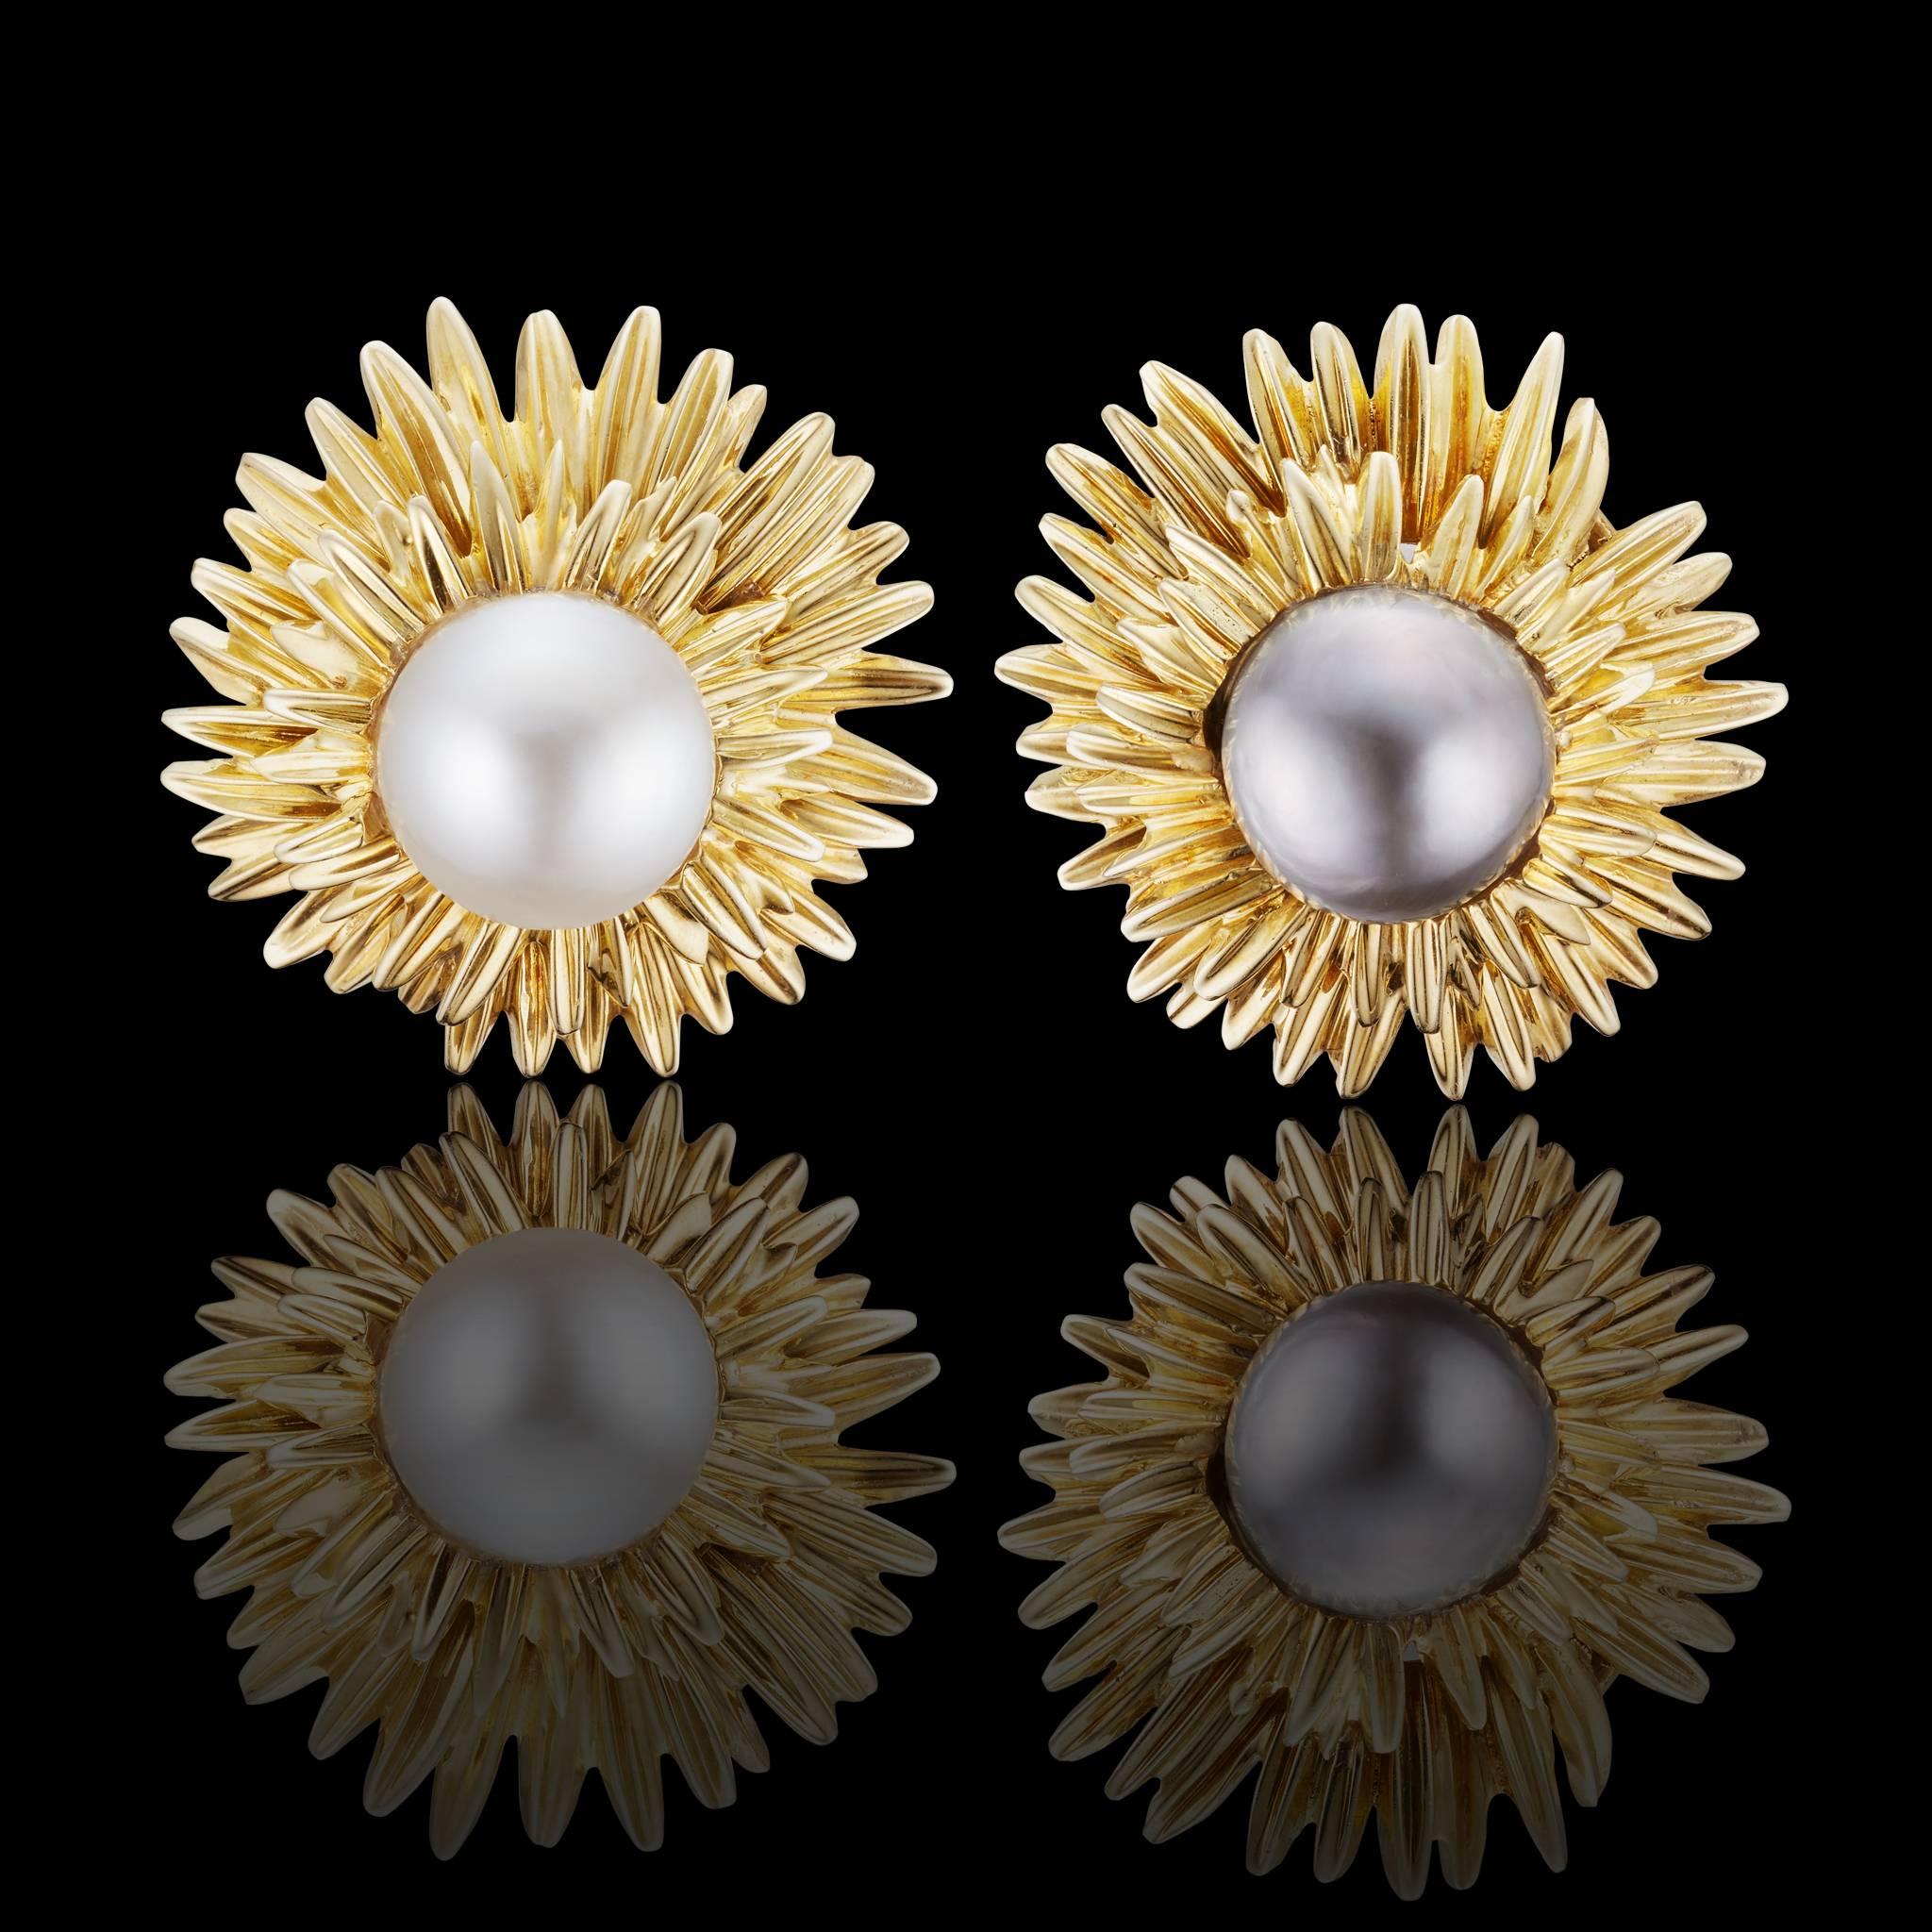 Van Cleef & Arpels 1960s pearls earrings  on 18 carats yellow gold.
-1 grey pearl.
-1 white pearl.
-Signed :V C A.
-Numbered: 10 066
-Ear pierce clip fittings.